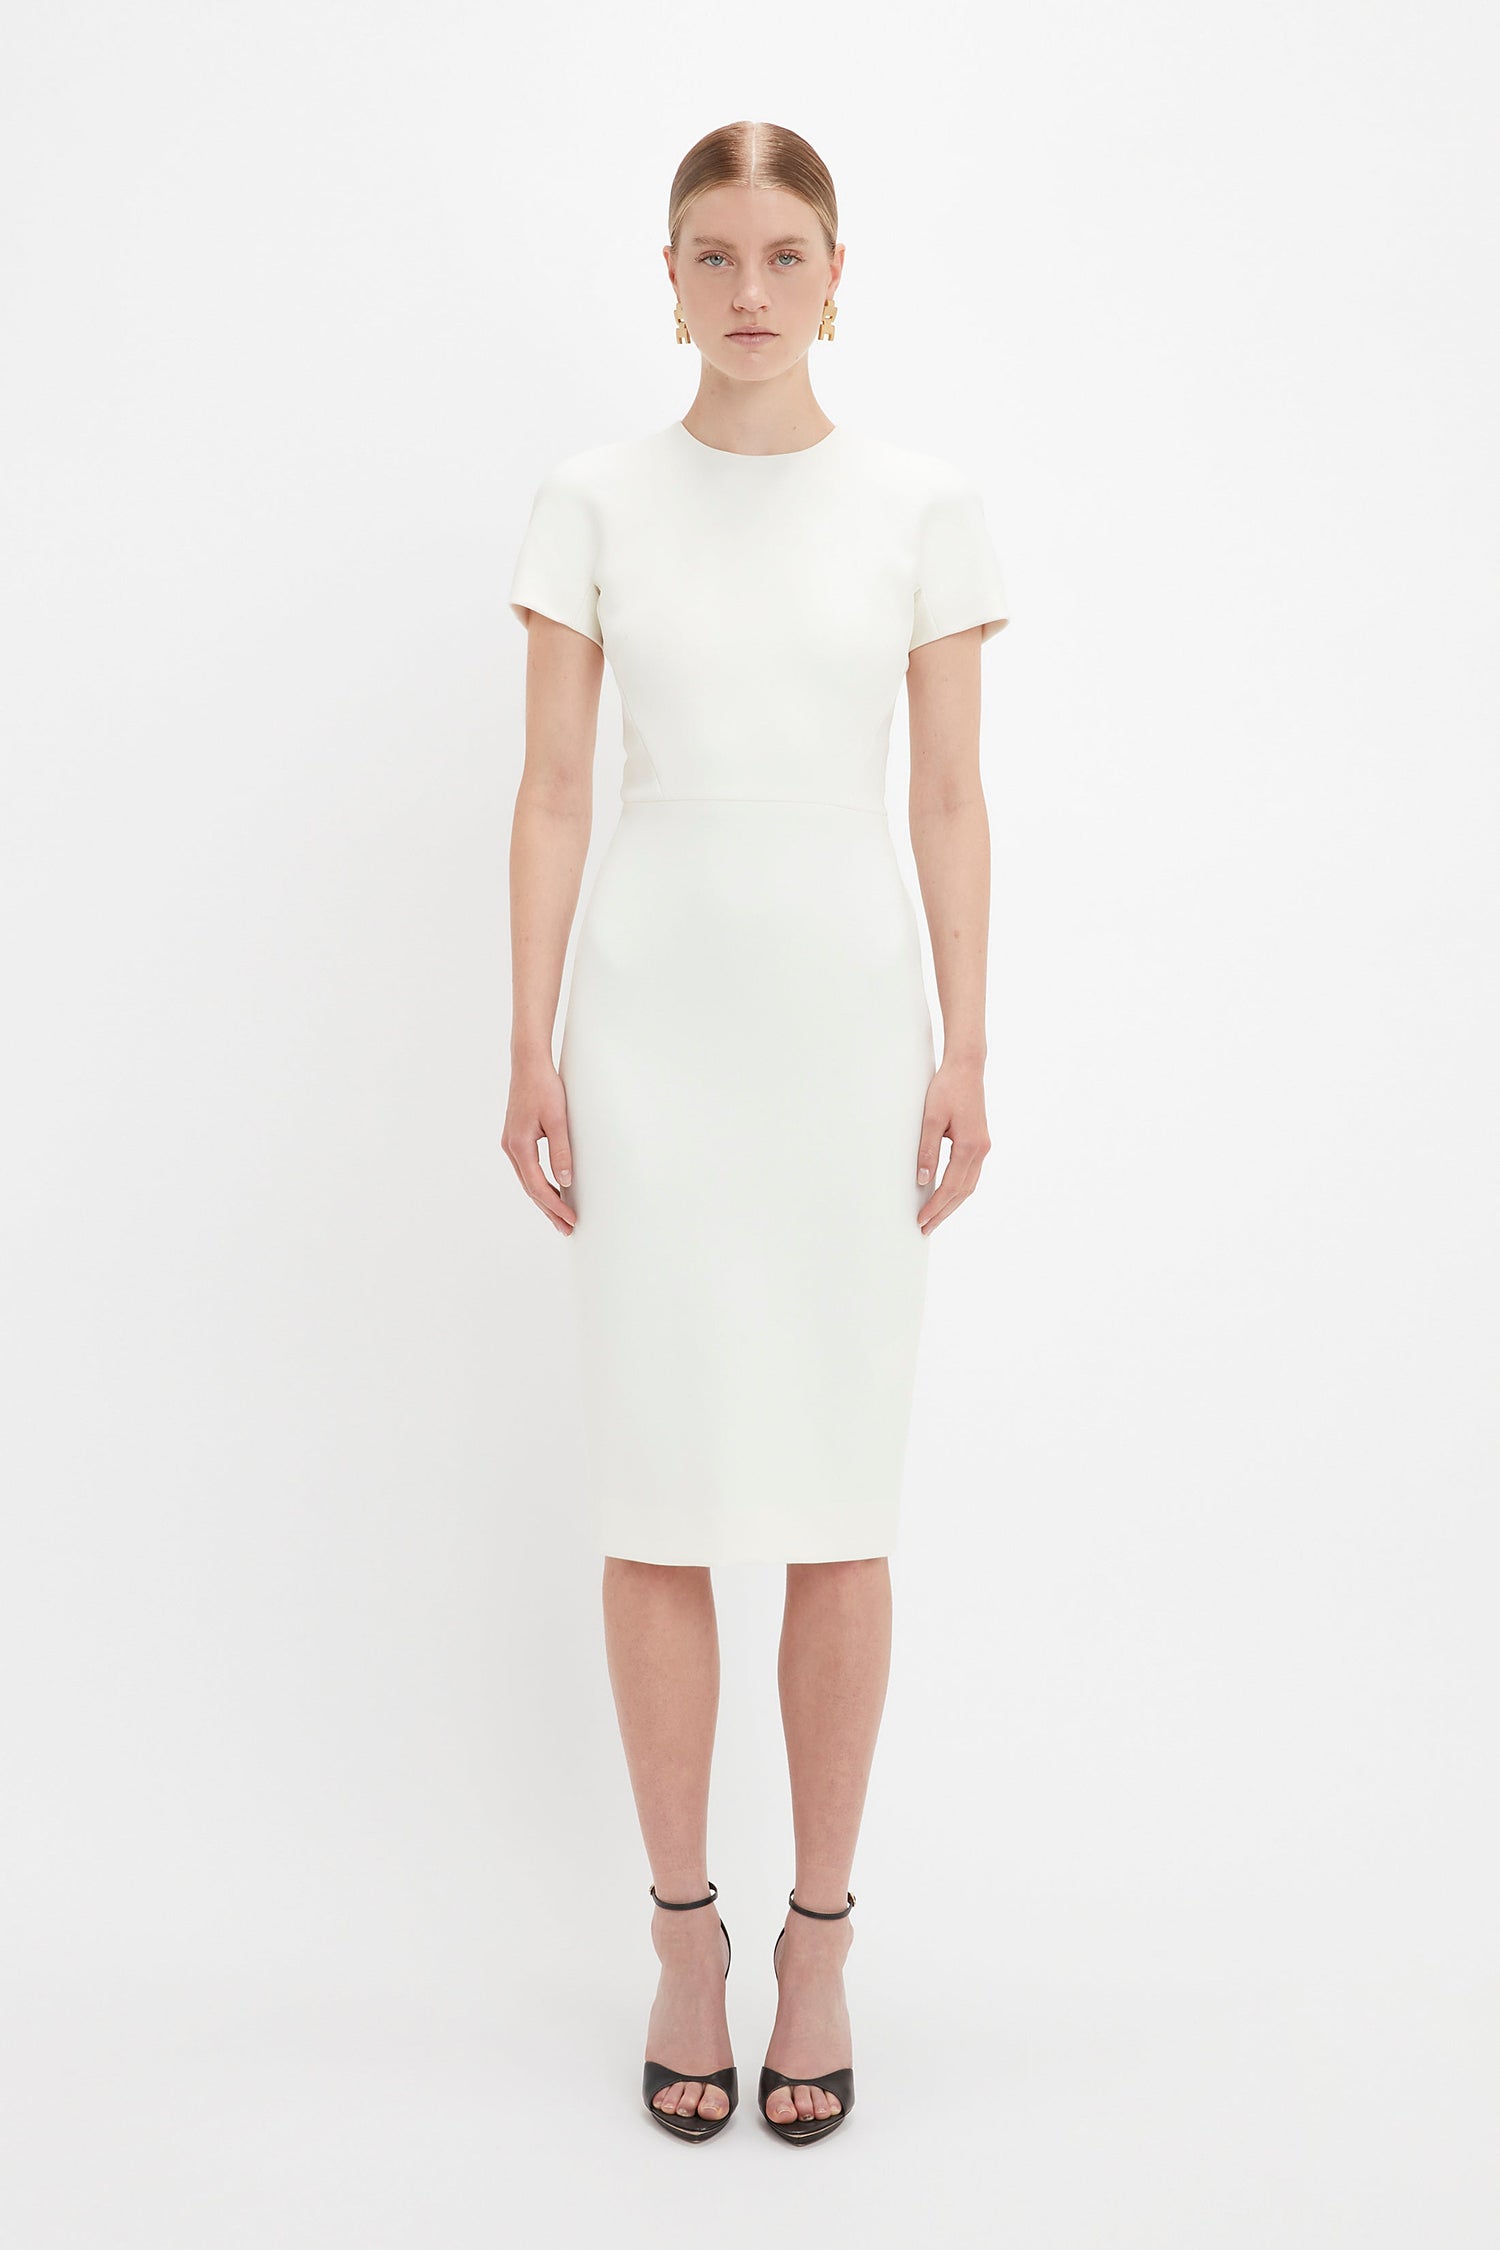 A woman in a Victoria Beckham fitted T-shirt dress in ivory and black high-heeled sandals stands against a stark white background.